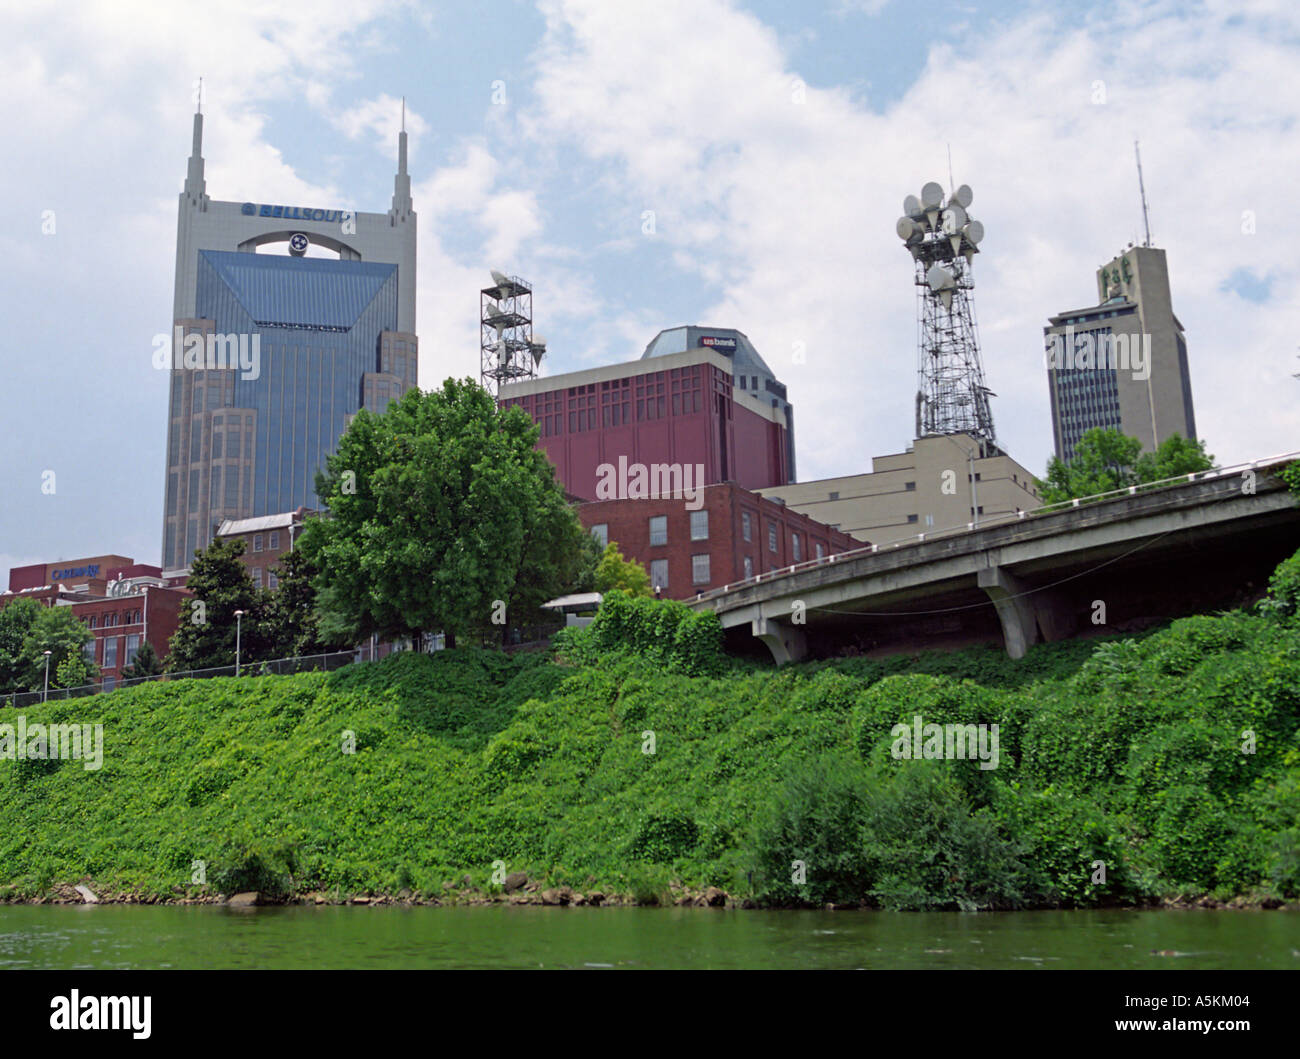 https://c8.alamy.com/comp/A5KM04/view-of-nashville-tennessee-from-the-cumberland-river-with-the-bell-A5KM04.jpg